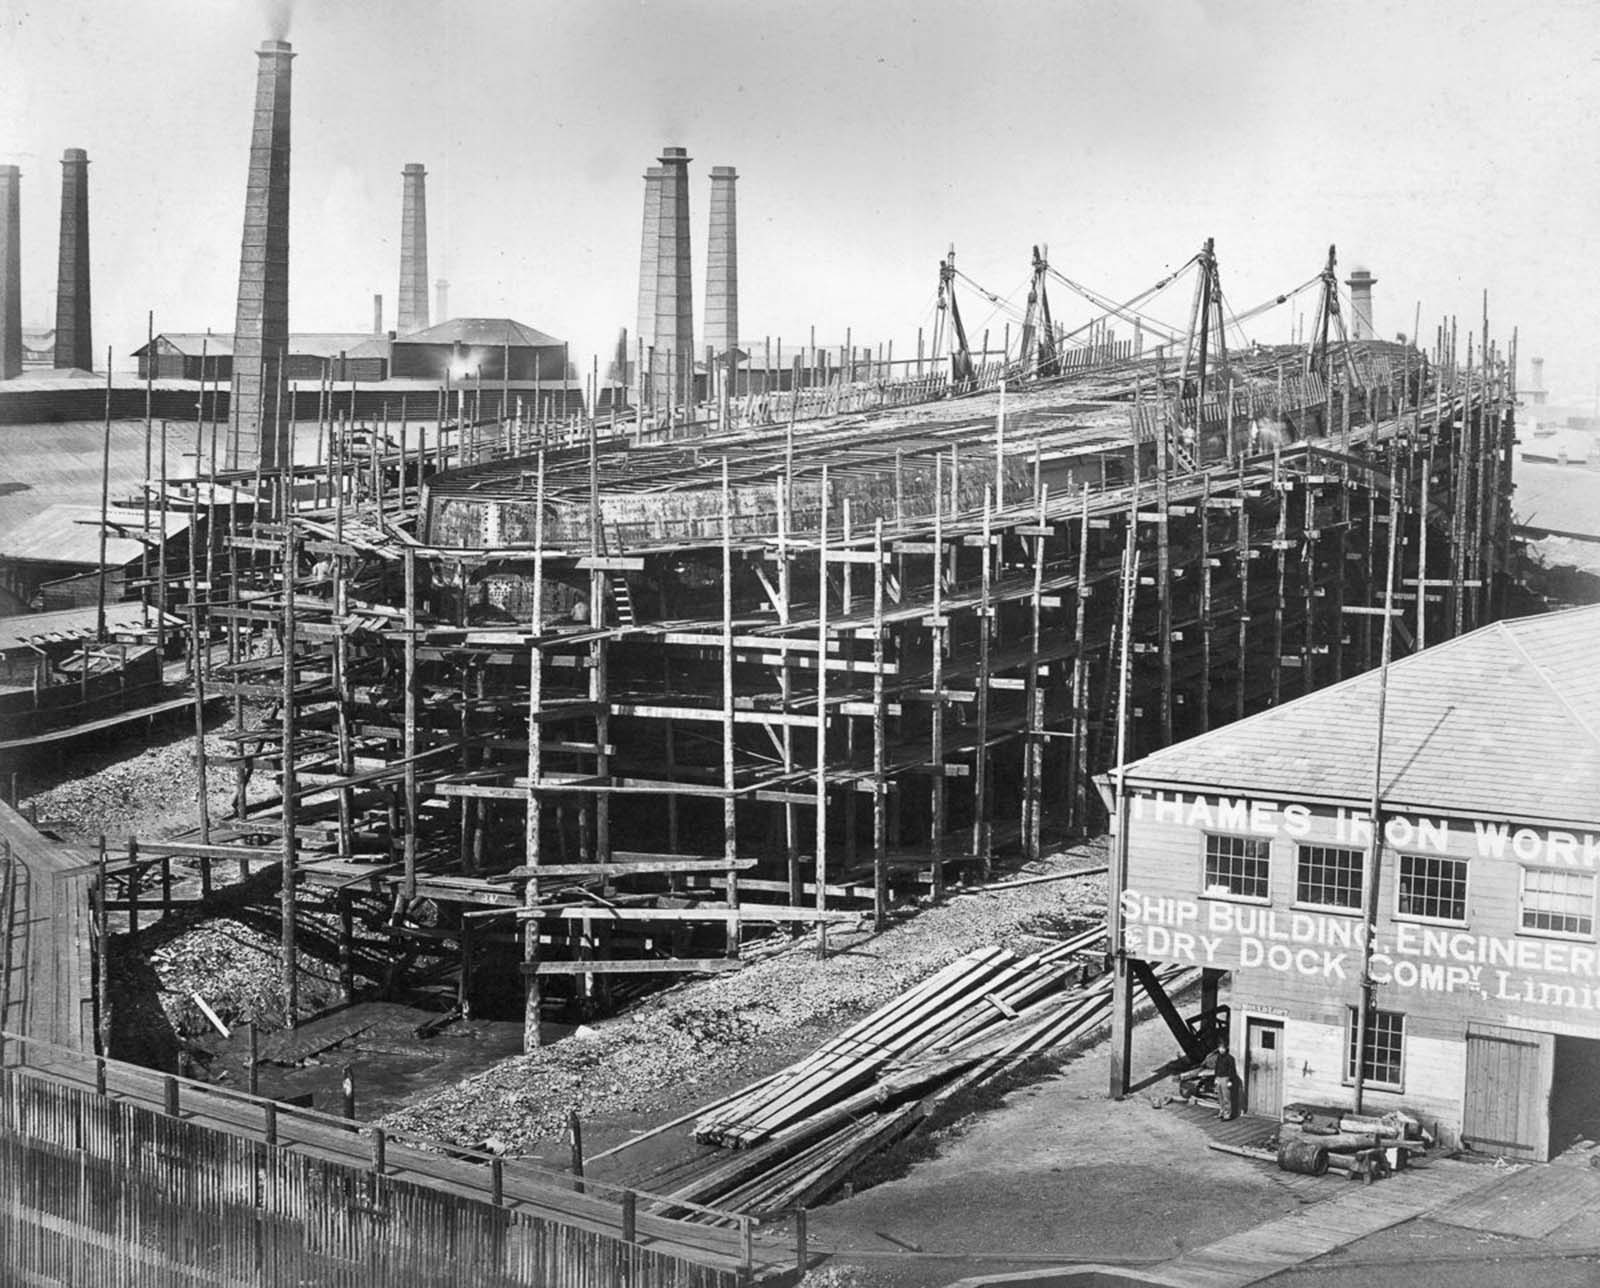 The construction of the William I at the Thames Iron Works, 1867.